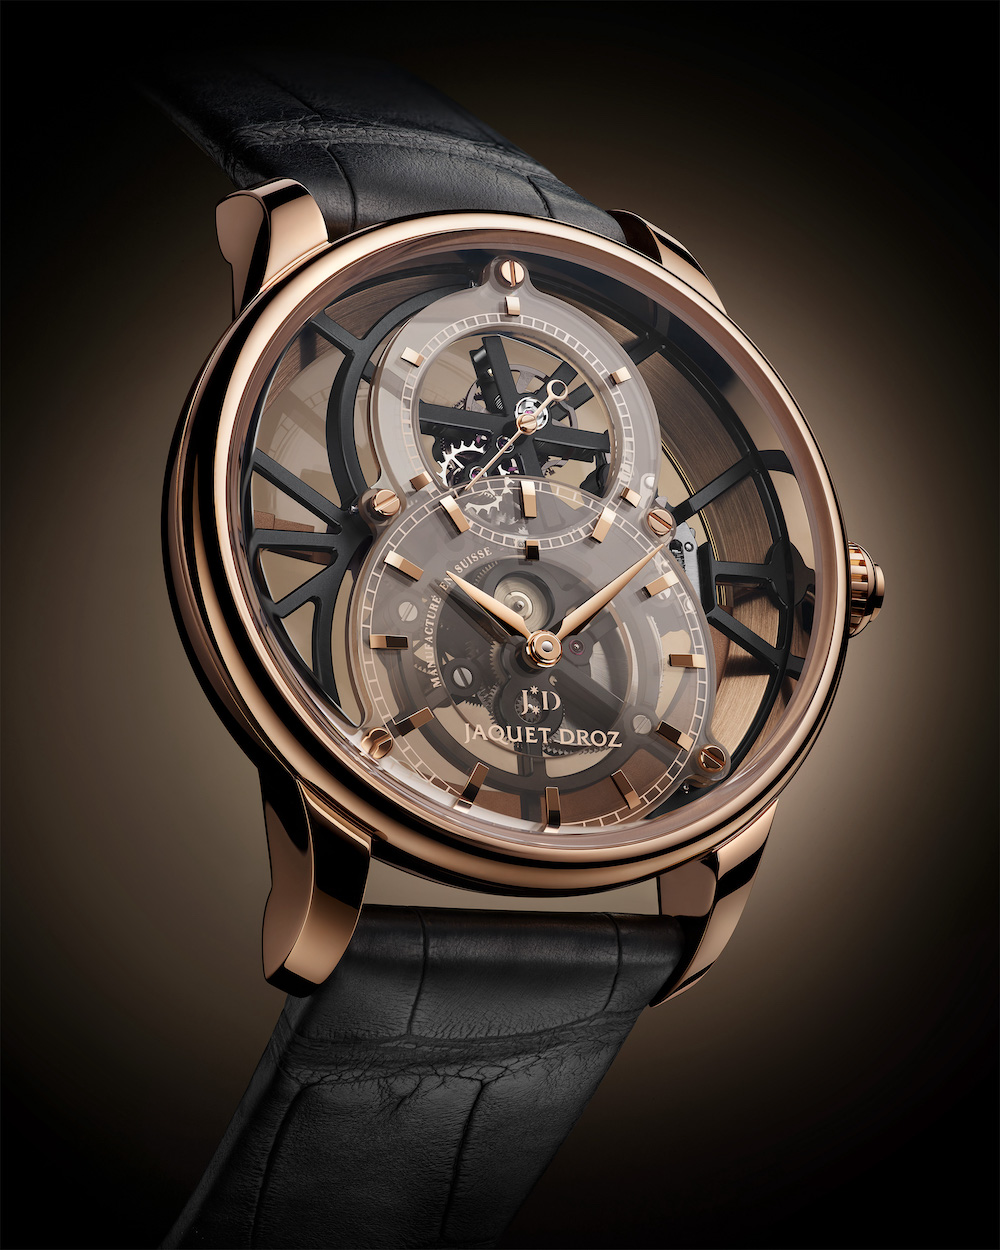 Jaquet Droz Shows It All With New Grande Seconde Skelet-One Tourbillon